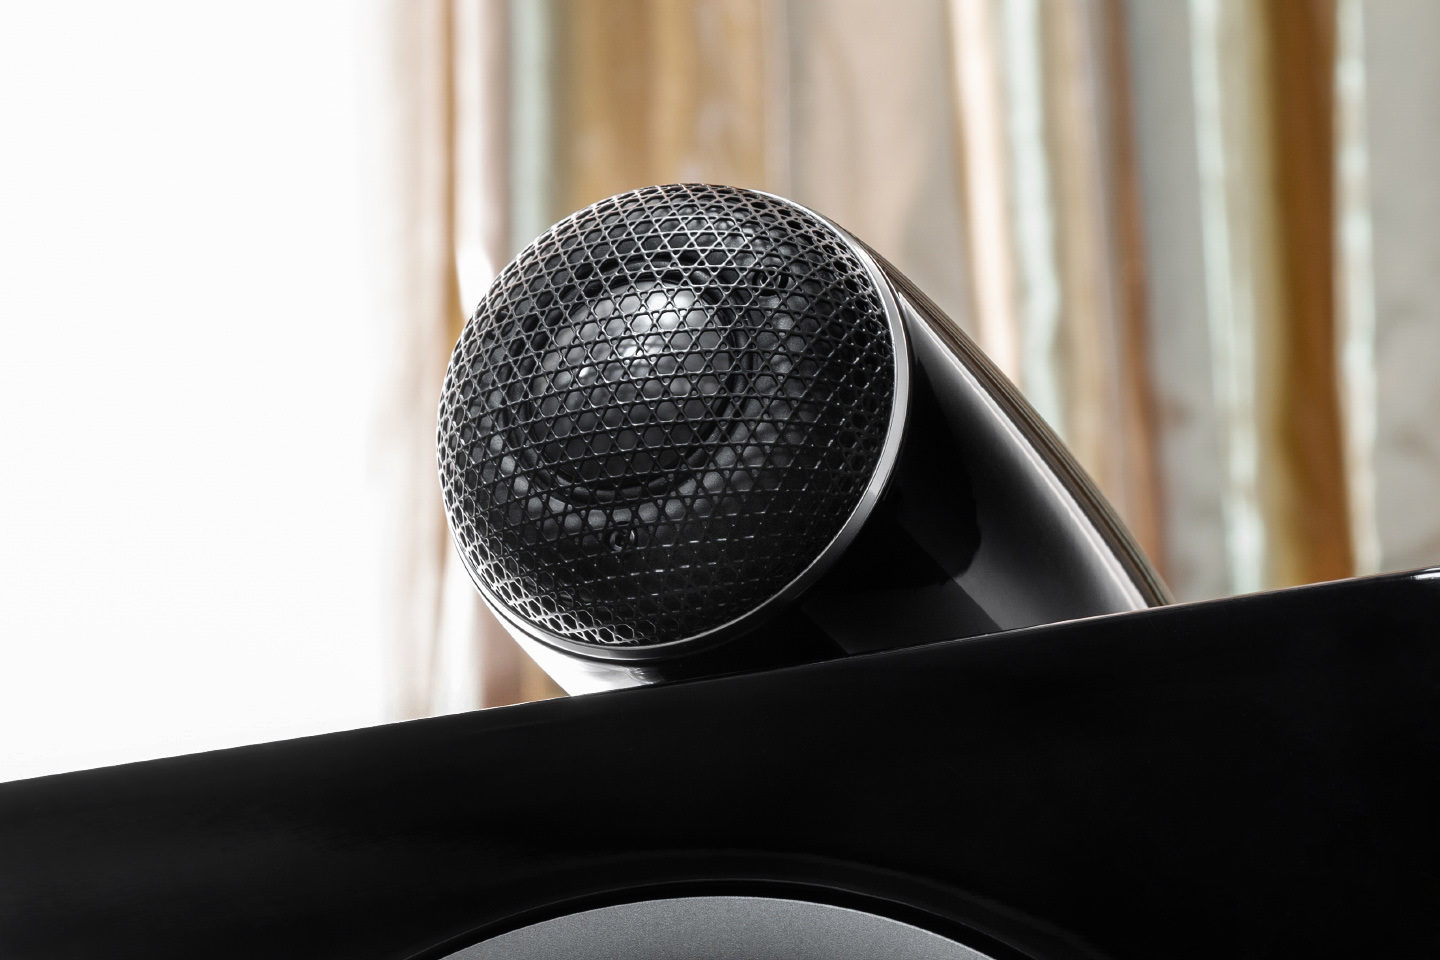 Bowers & Wilkins 702 S2